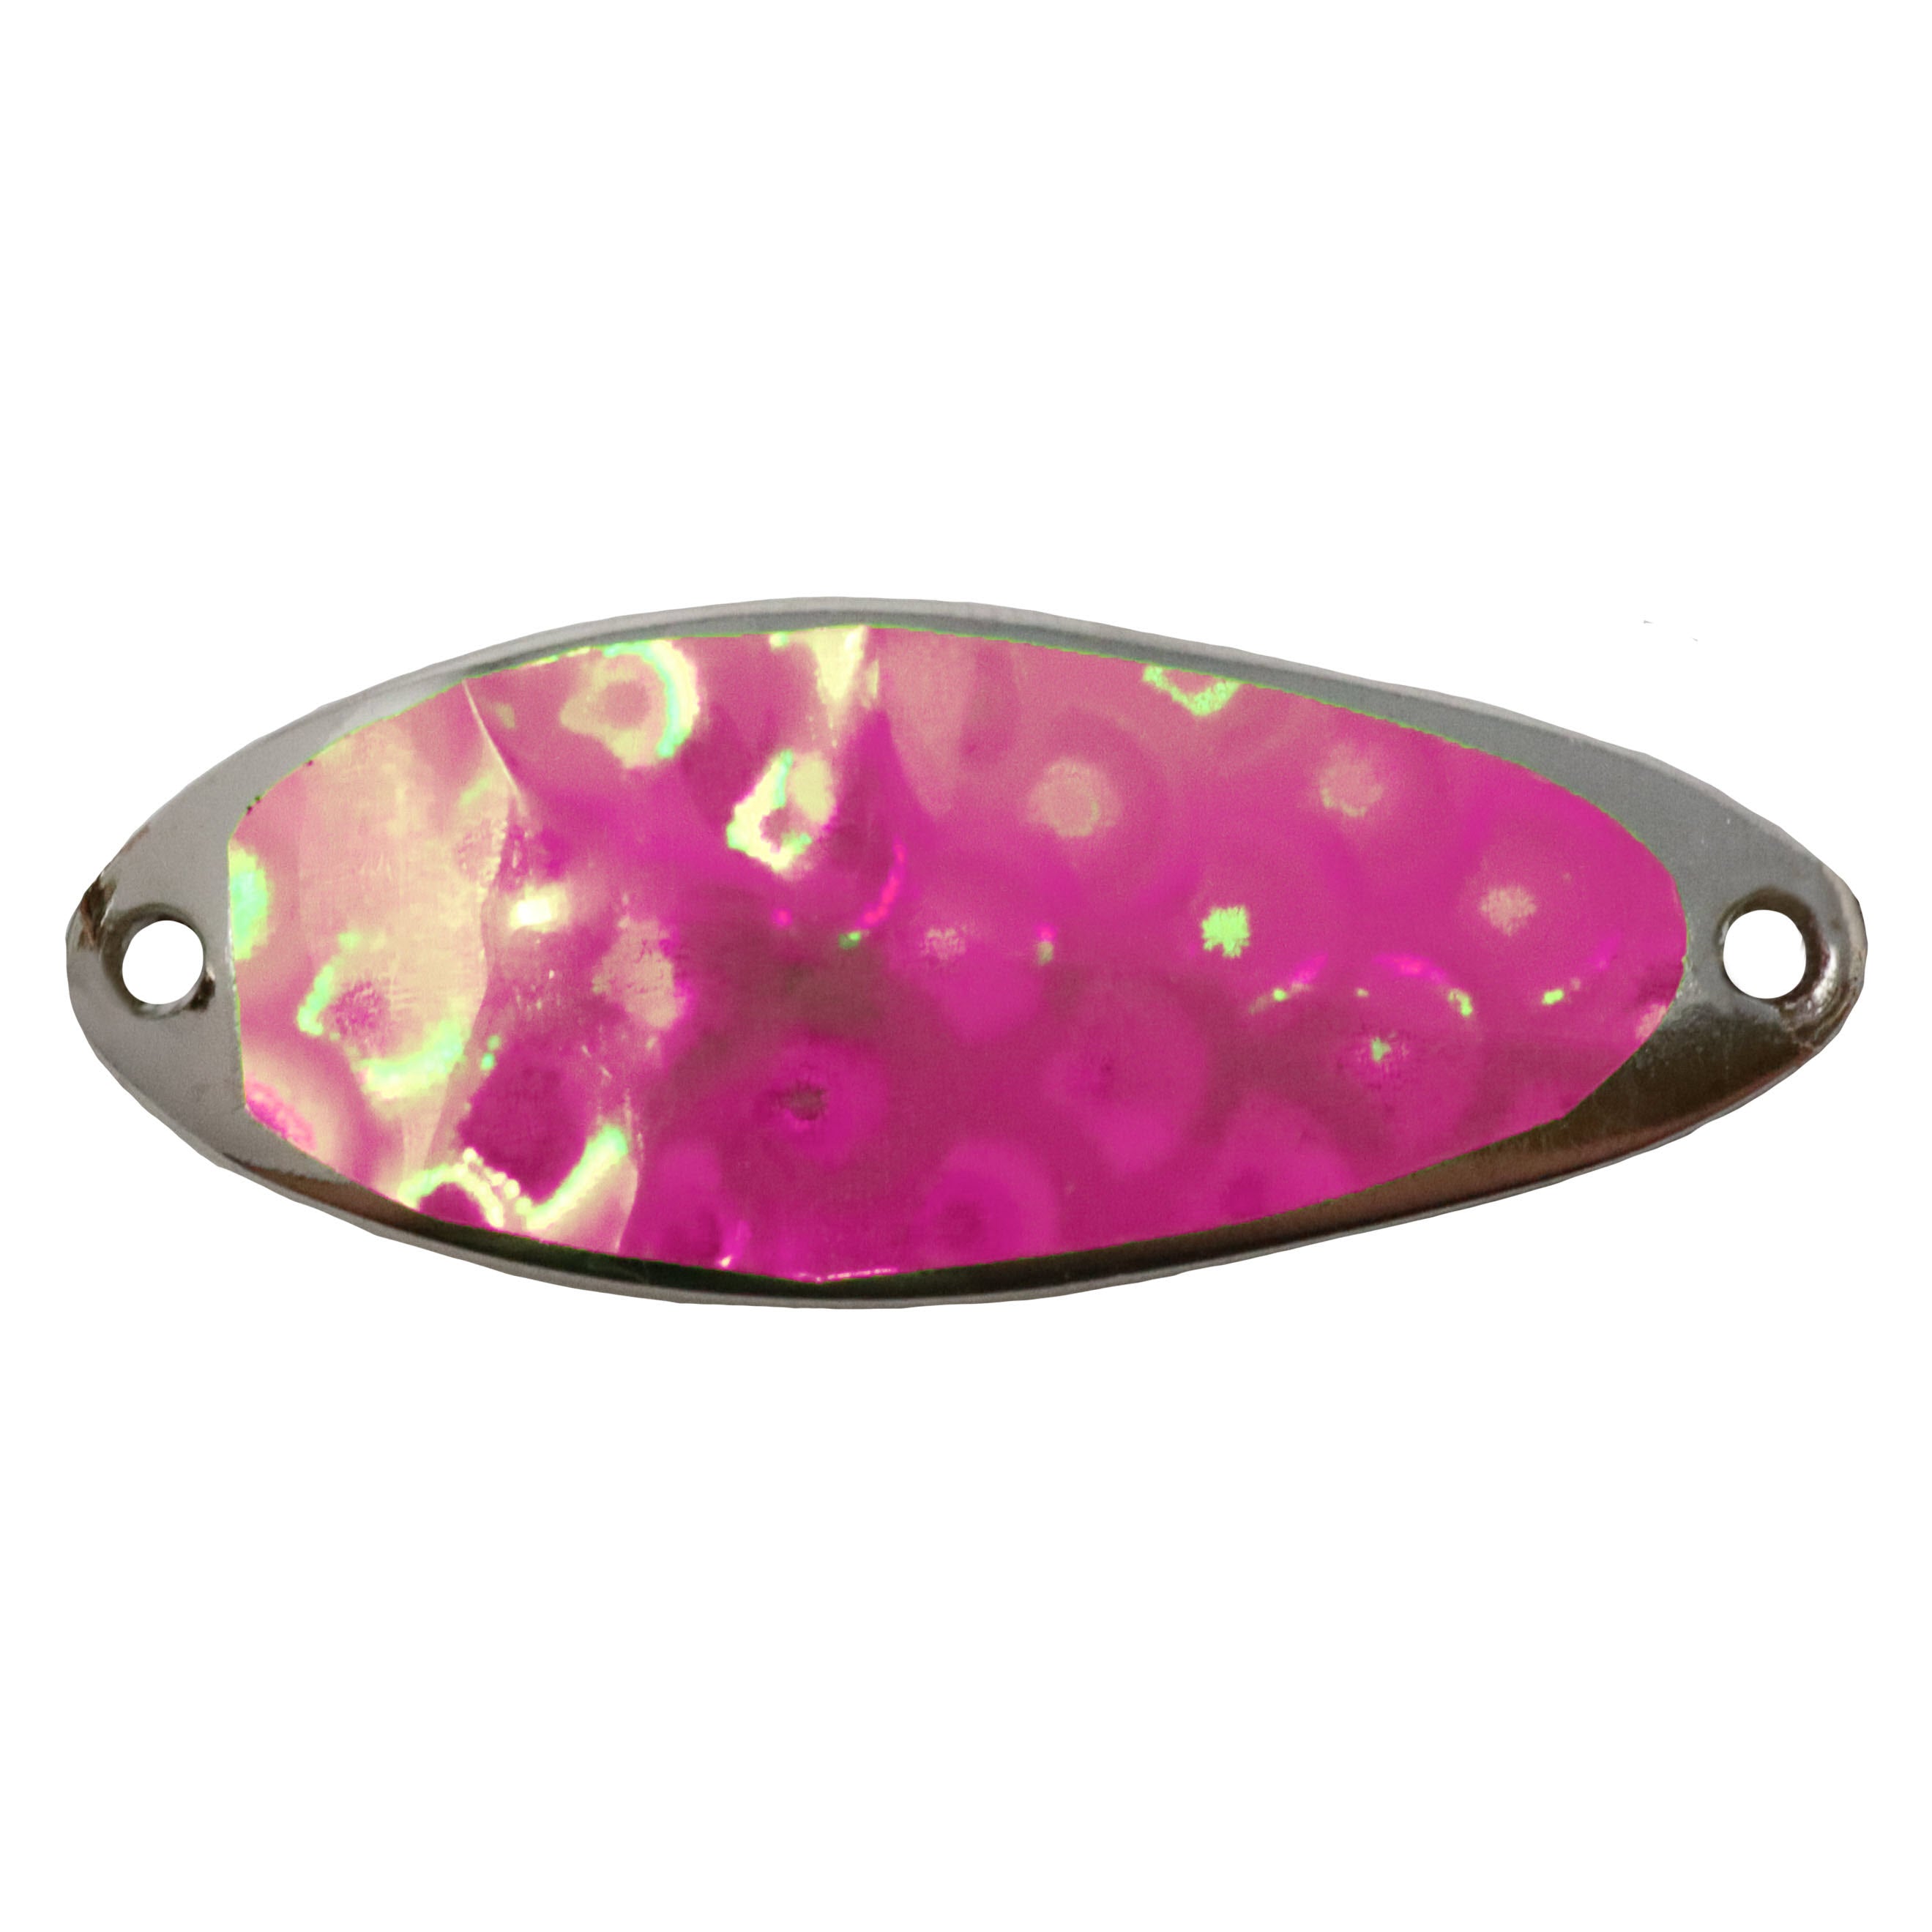 Little Cleo Spoon - Hammered Pink/Blue by Acme Tackle Company at